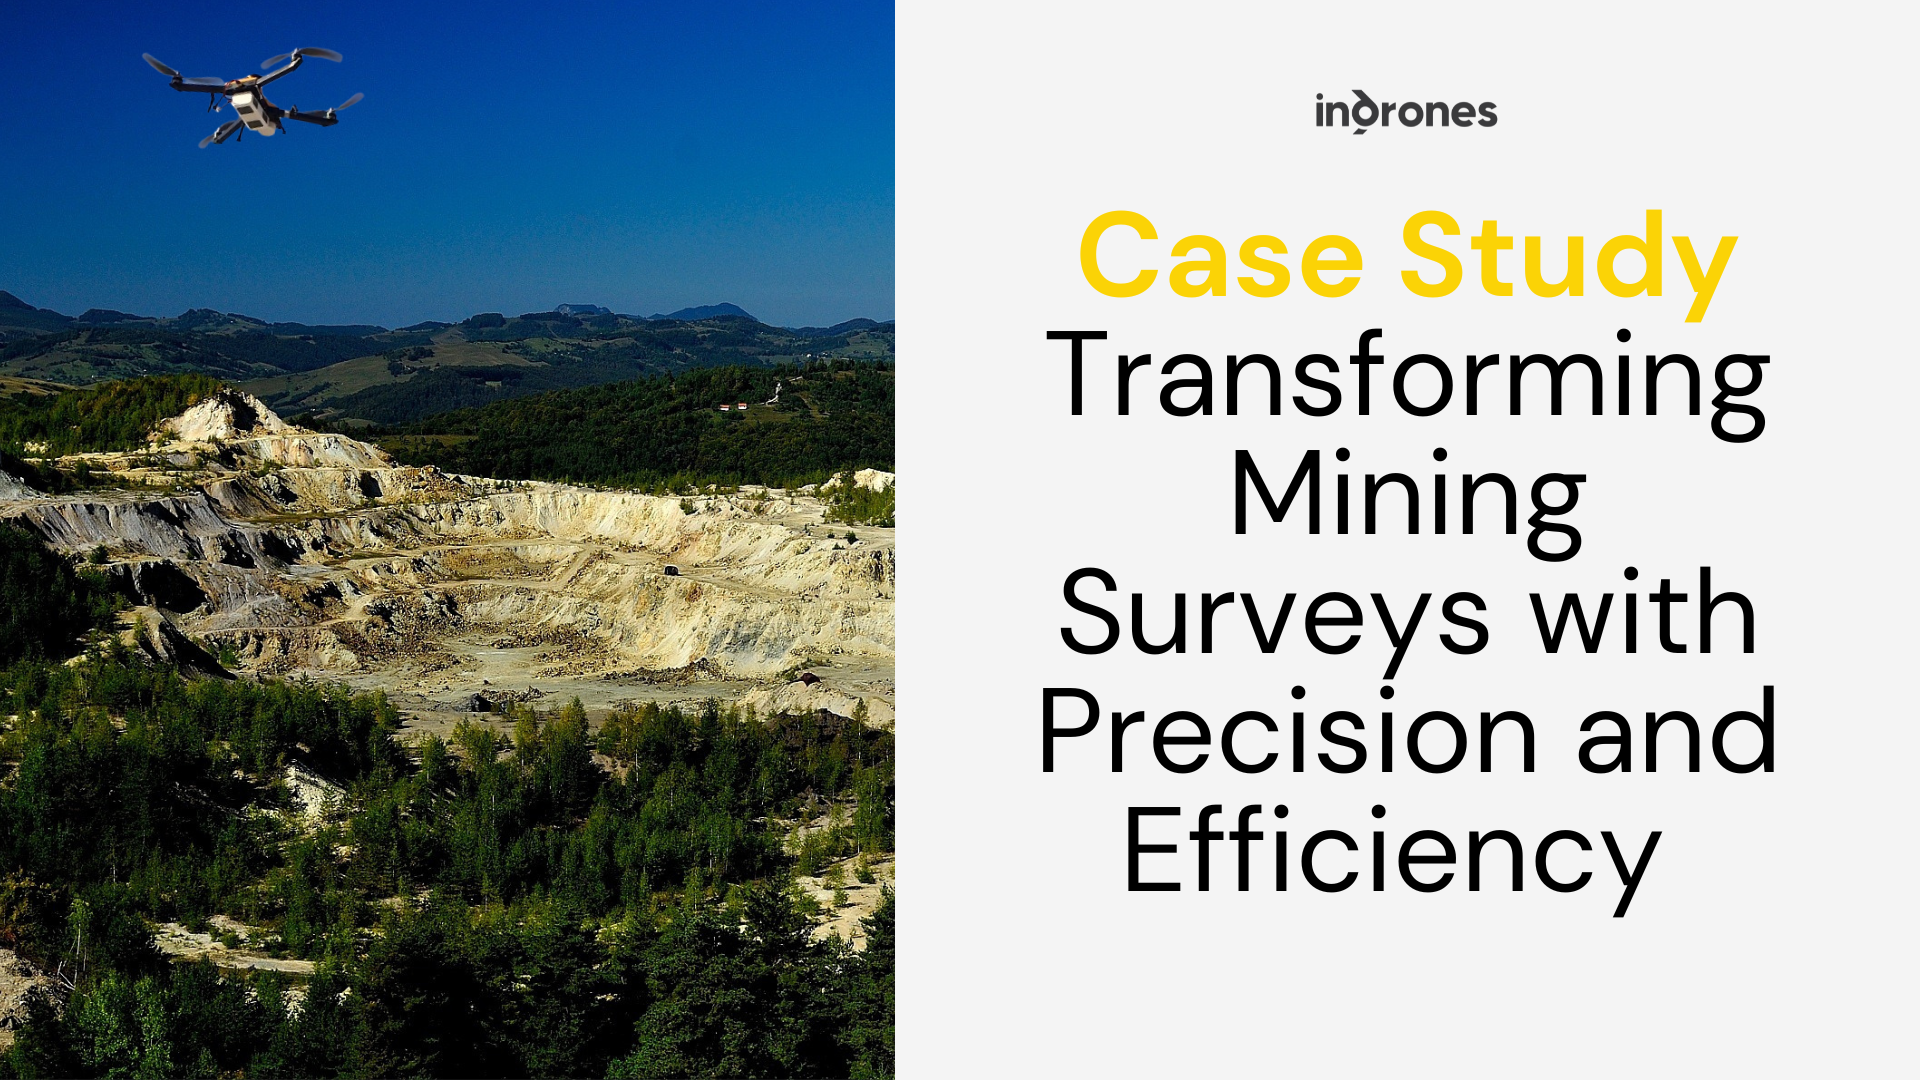 Indrones case study banner image containing text 'Case Study Transforming Mining Surveys with Prescision and Efficiency' 